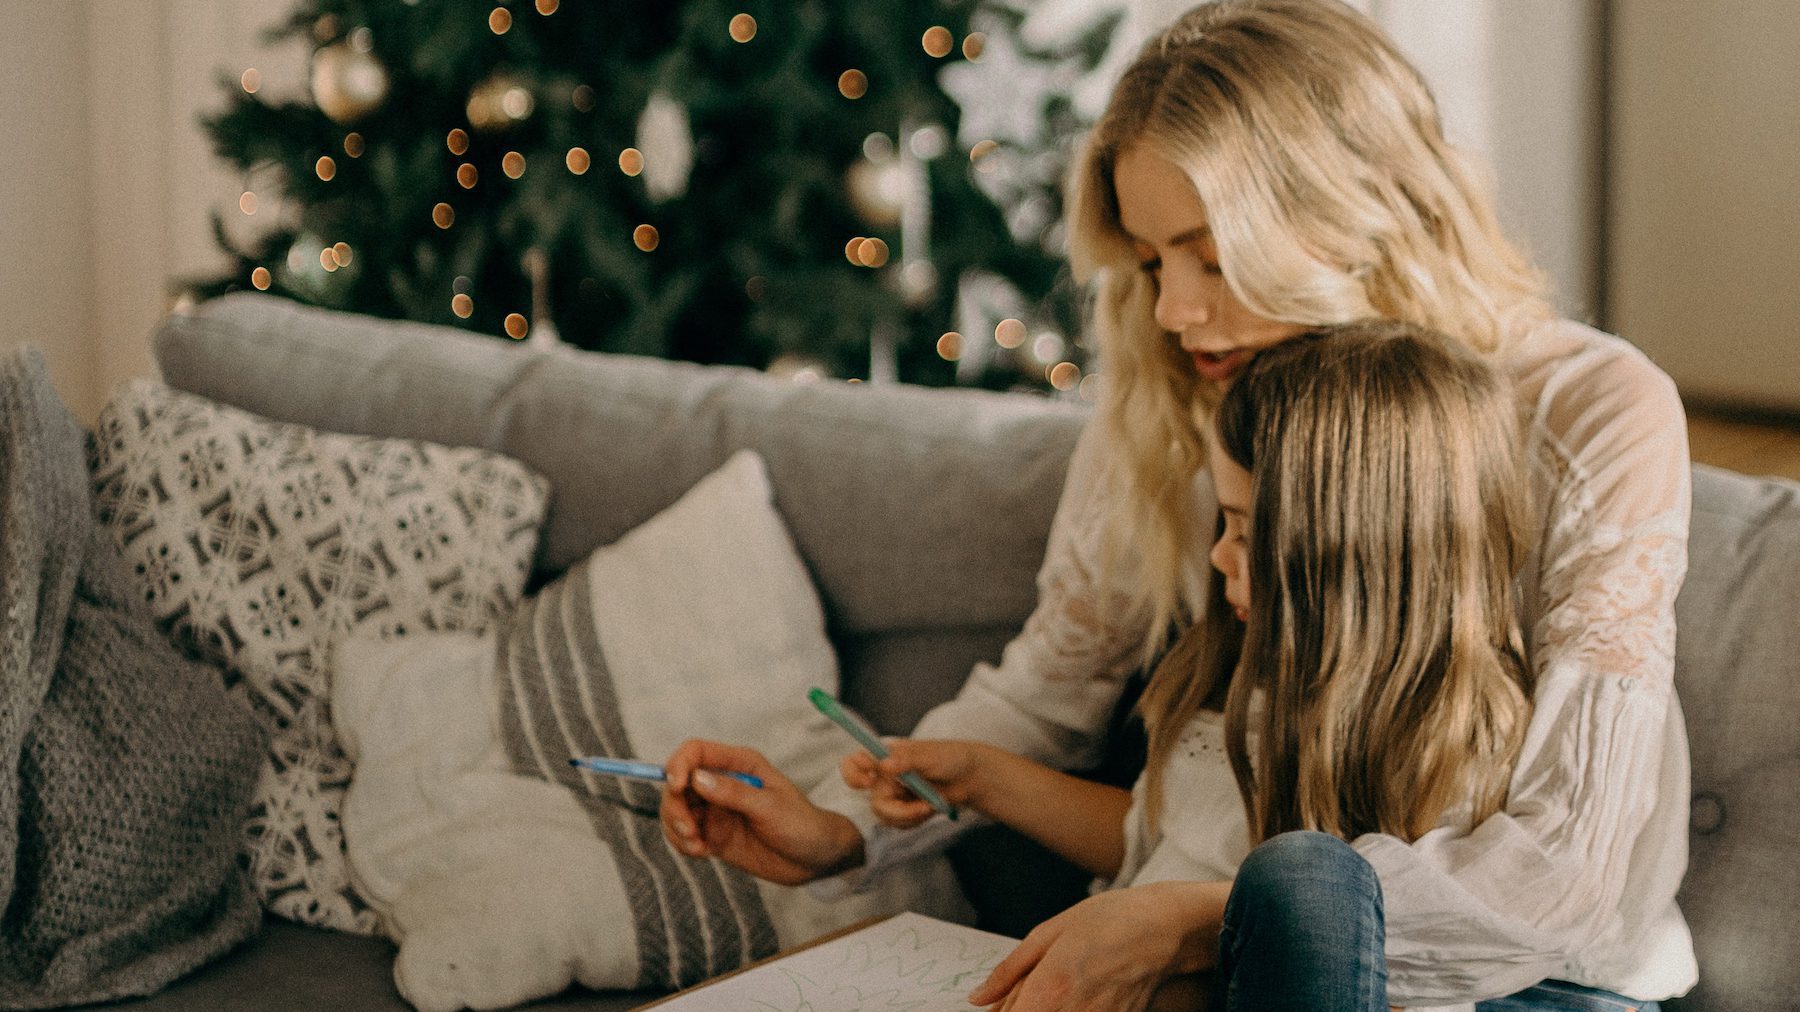 Mother and daughter drawing together on the couch with a Christmas tree in the background.